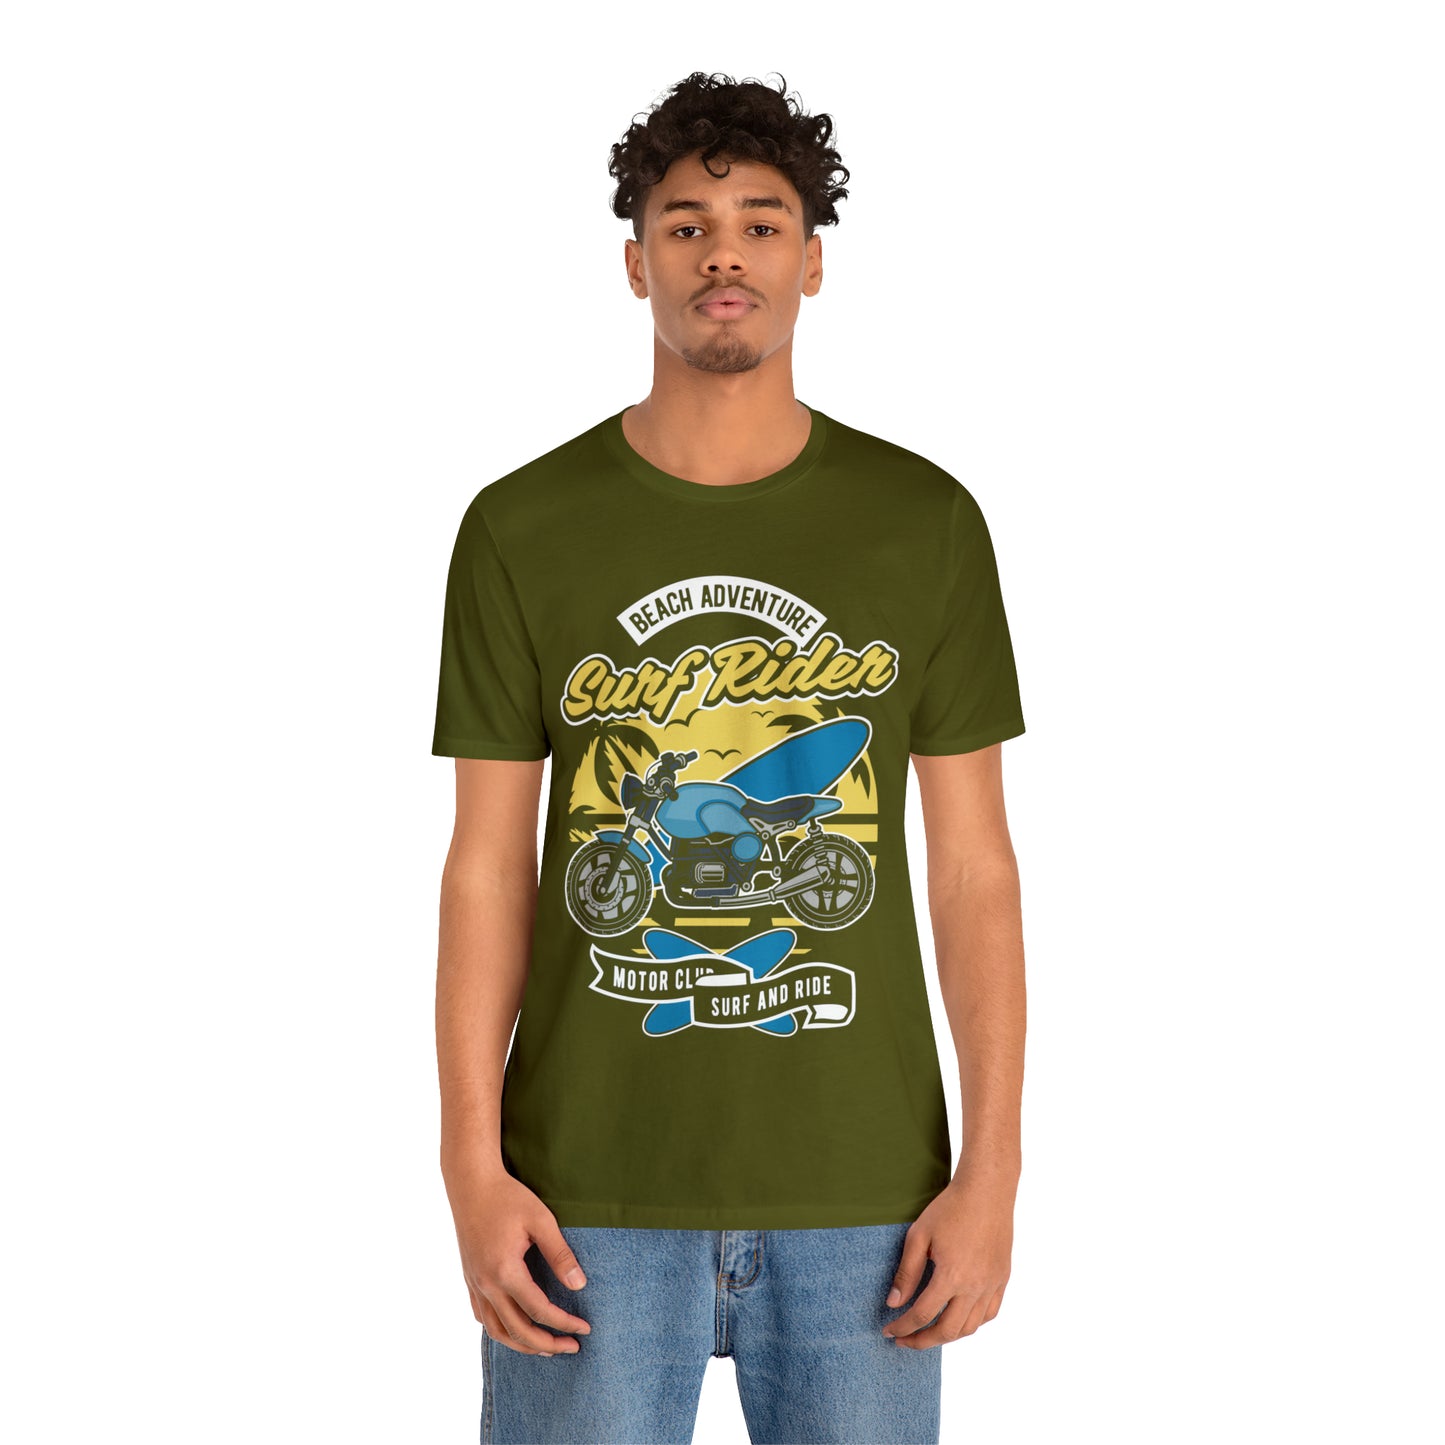 SURF RIDER - Printed in the USA - Unisex Jersey Short Sleeve Tee